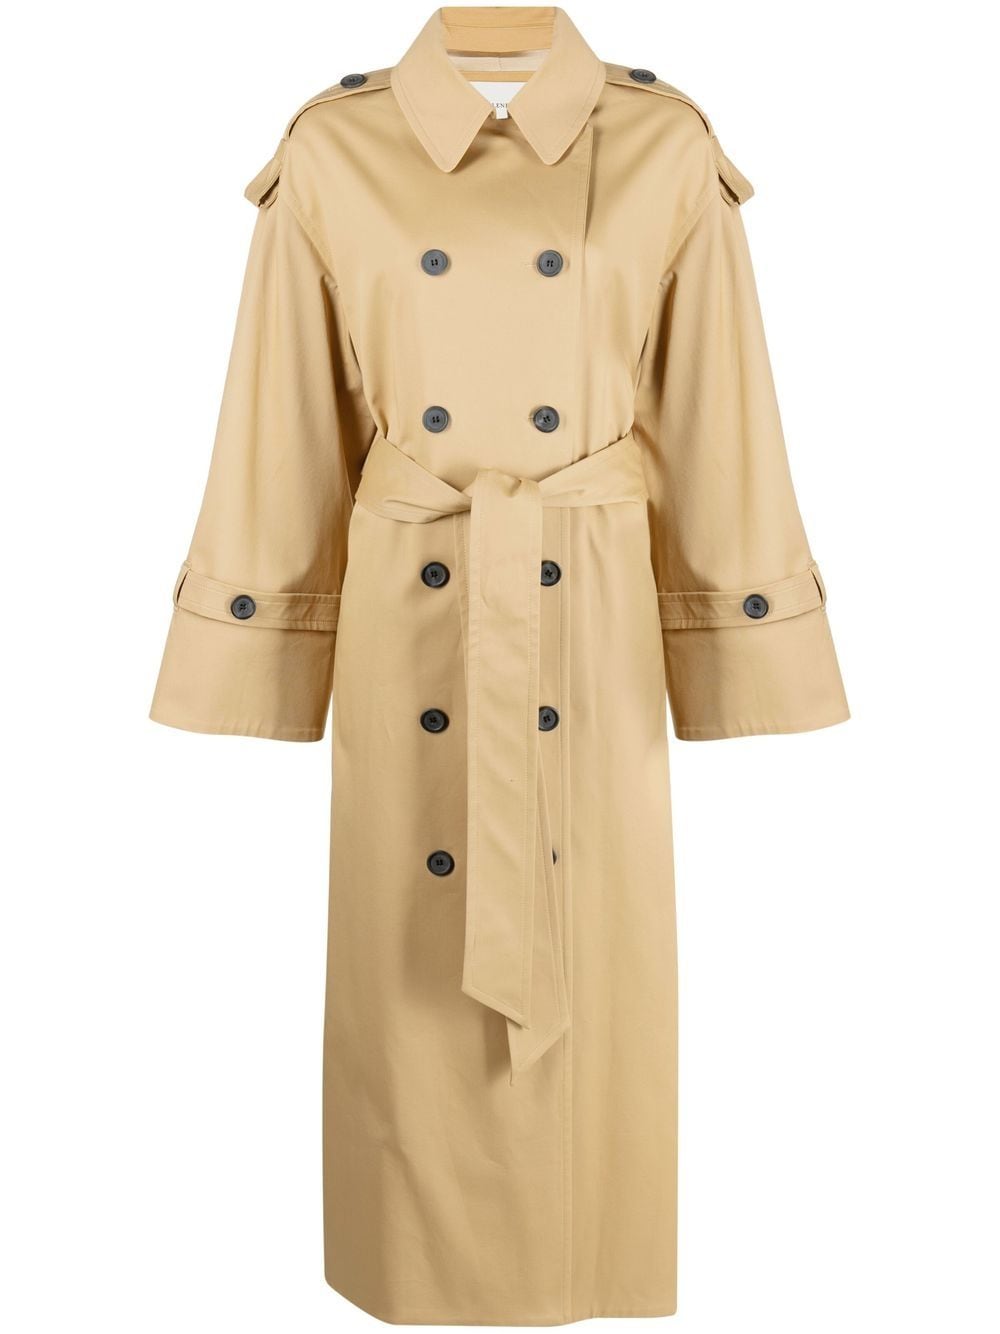 BY MALENE BIRGER BELTED TRENCH COAT